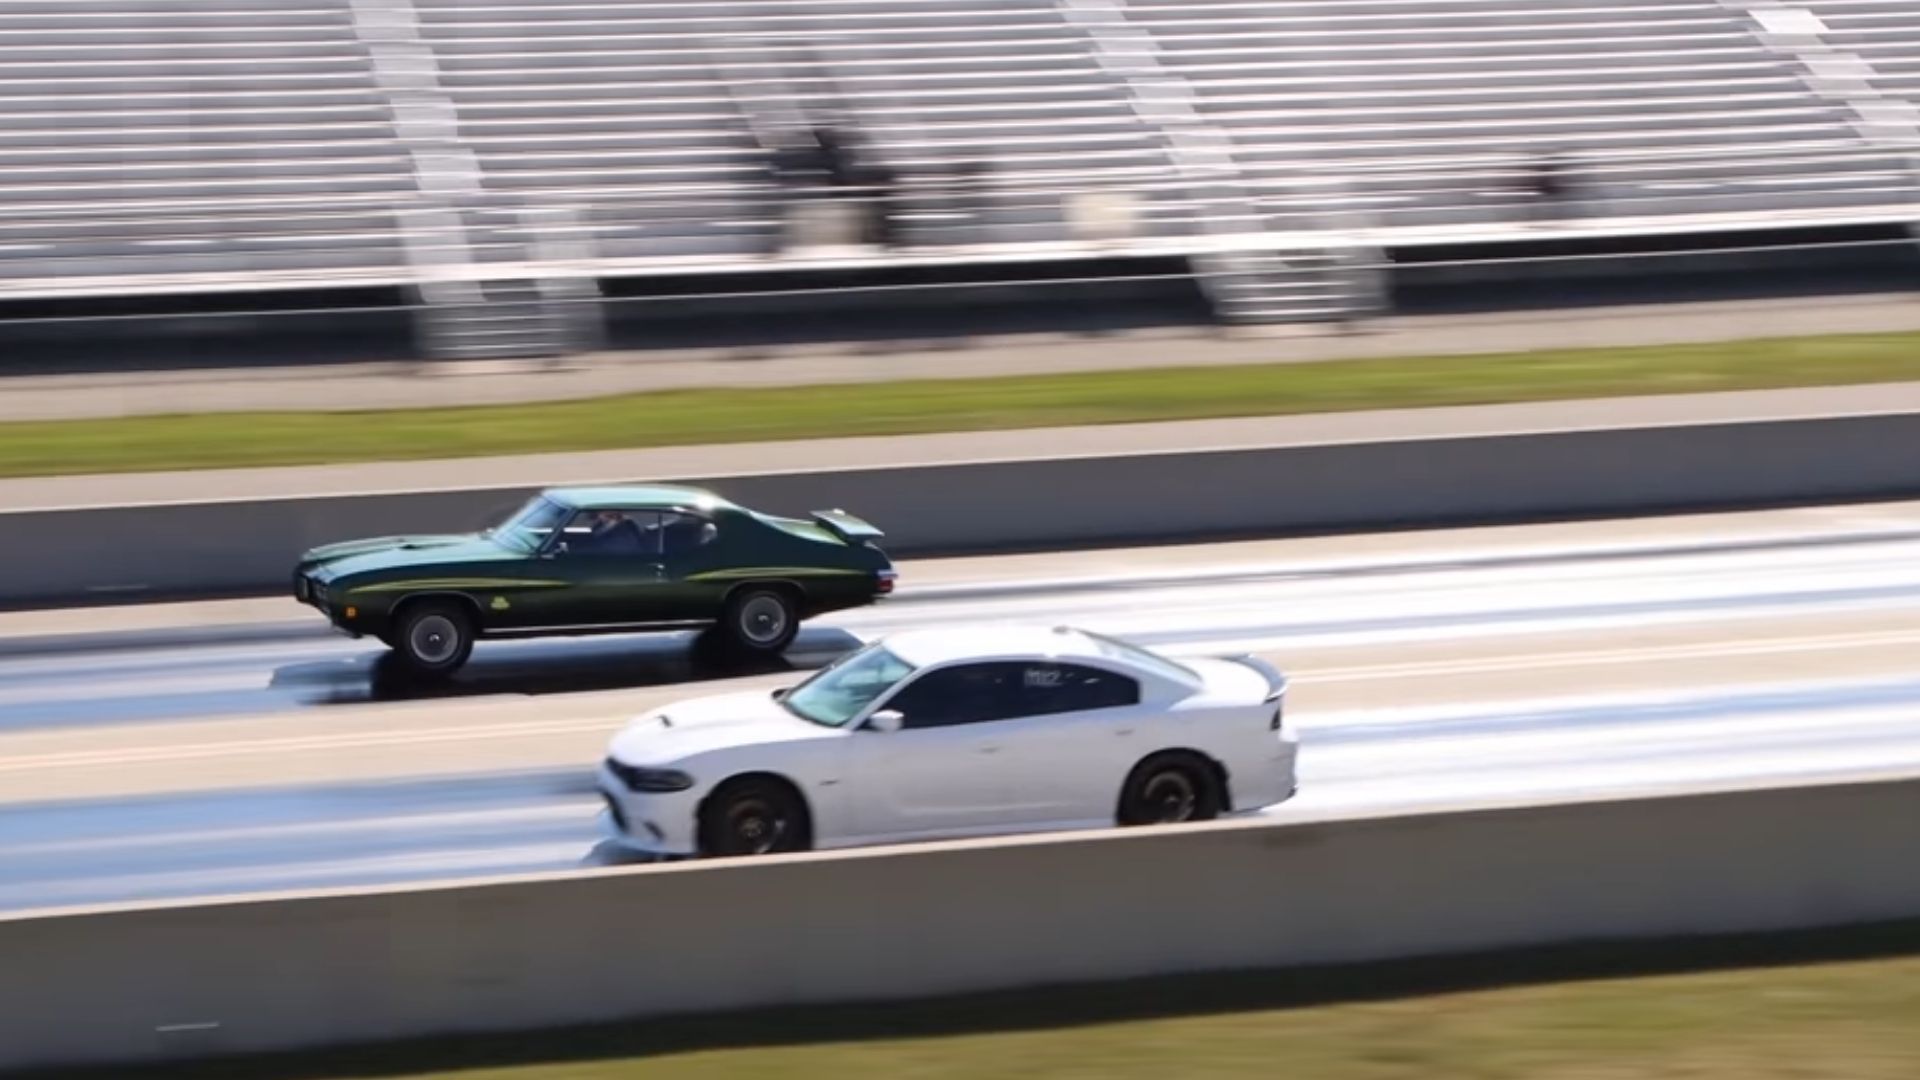 Charger Scat Pack VS 1970 Pontiac GTO Proves How Far Performance Hasn't Come